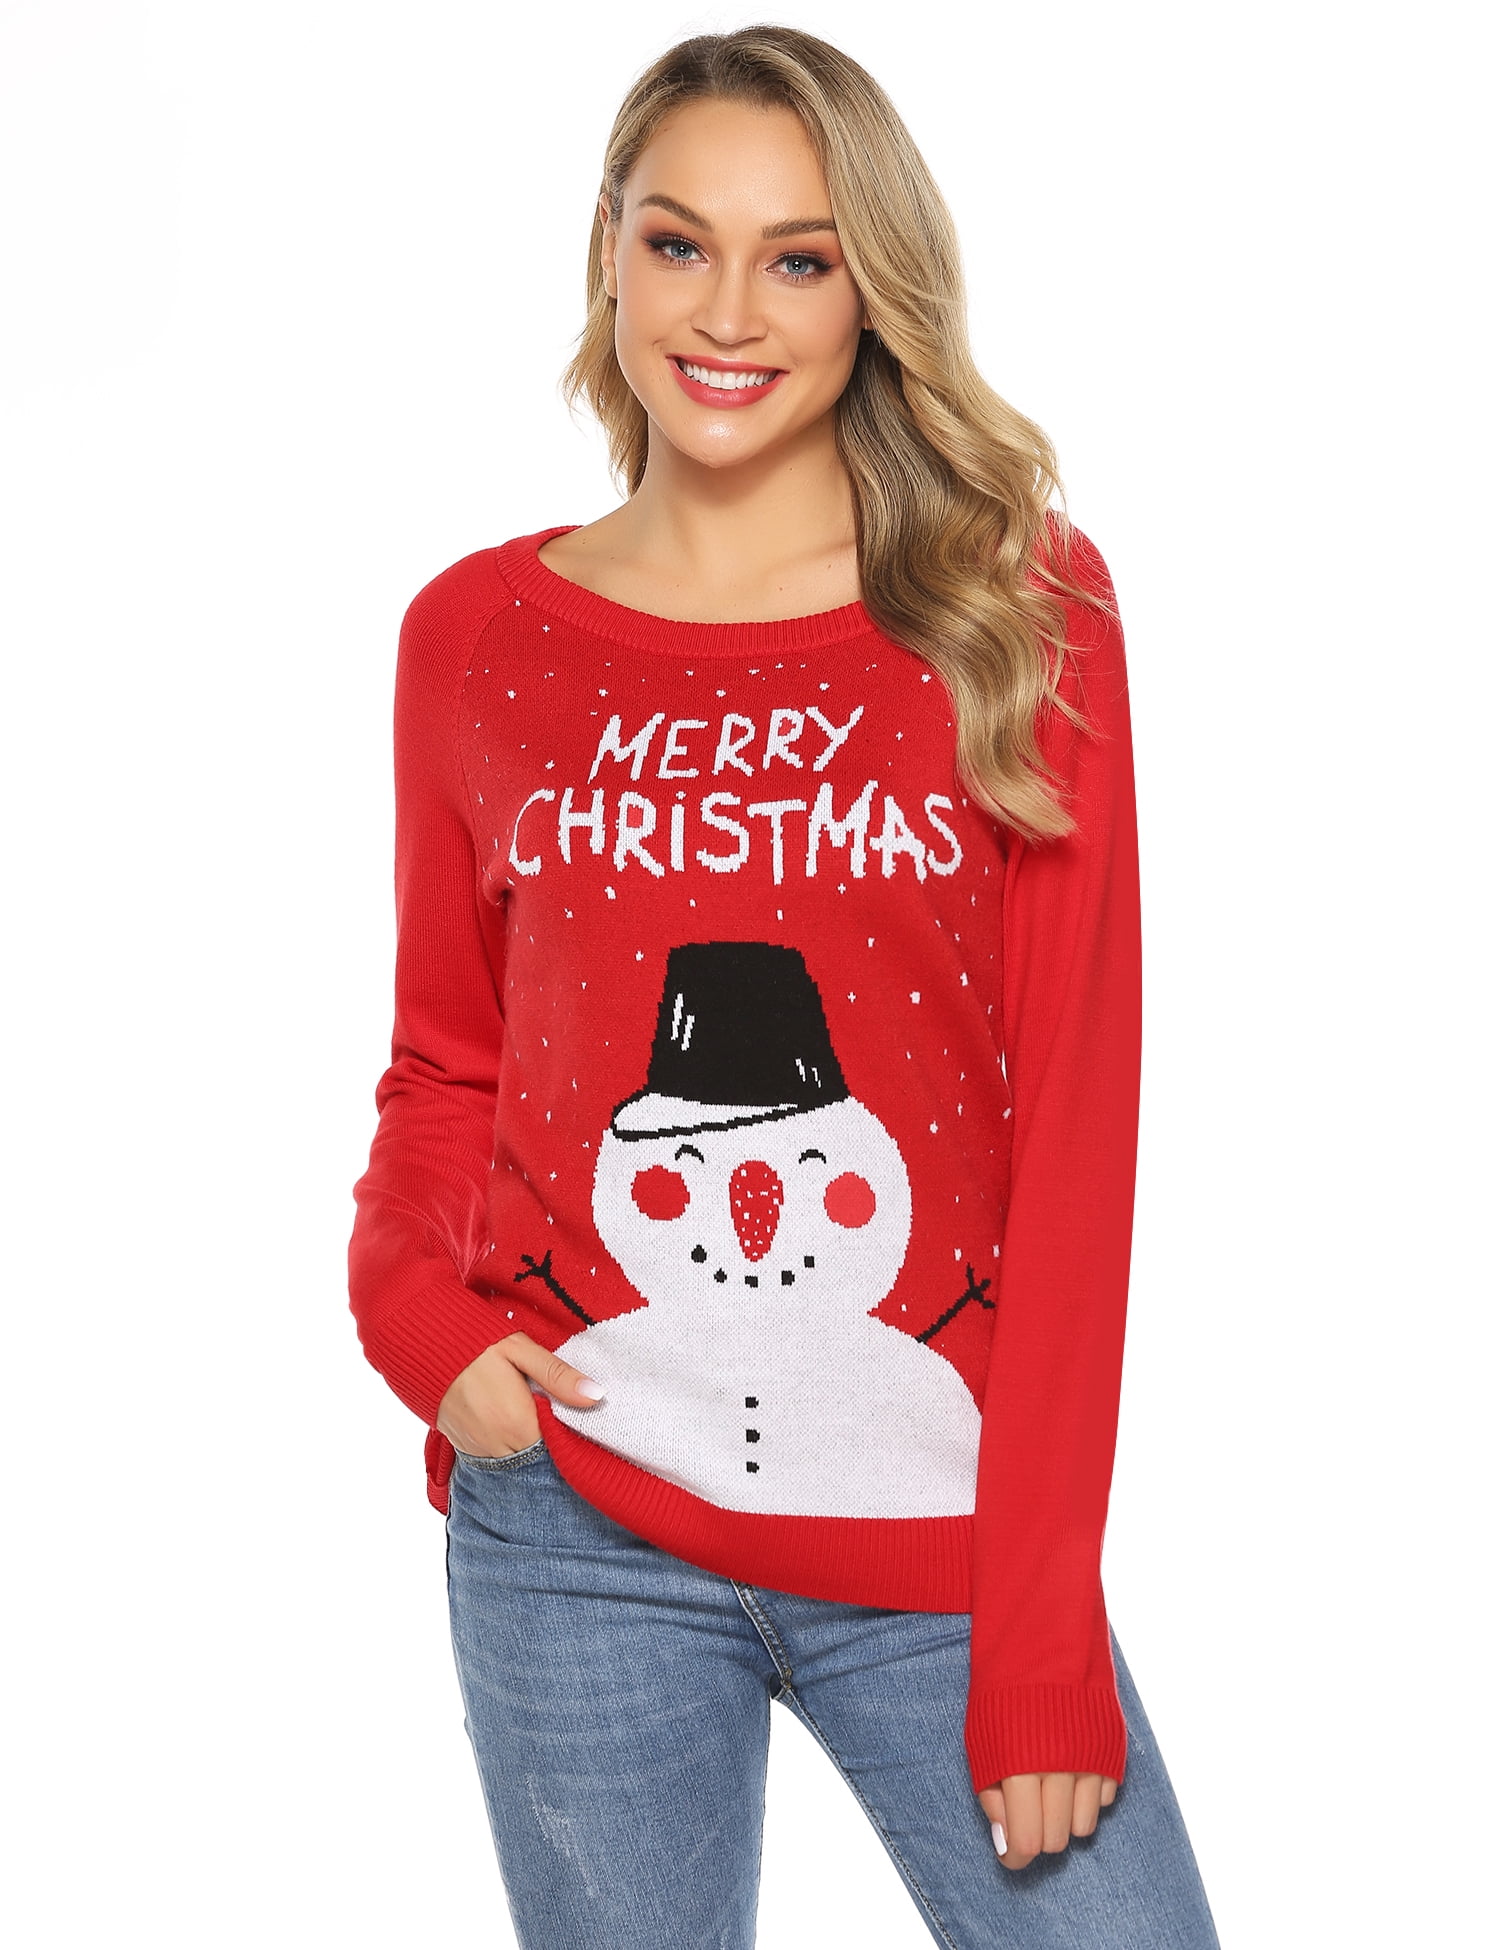 Uniexcosm Women's Ugly Christmas Sweaters for Women Funny Long Sleeve ...